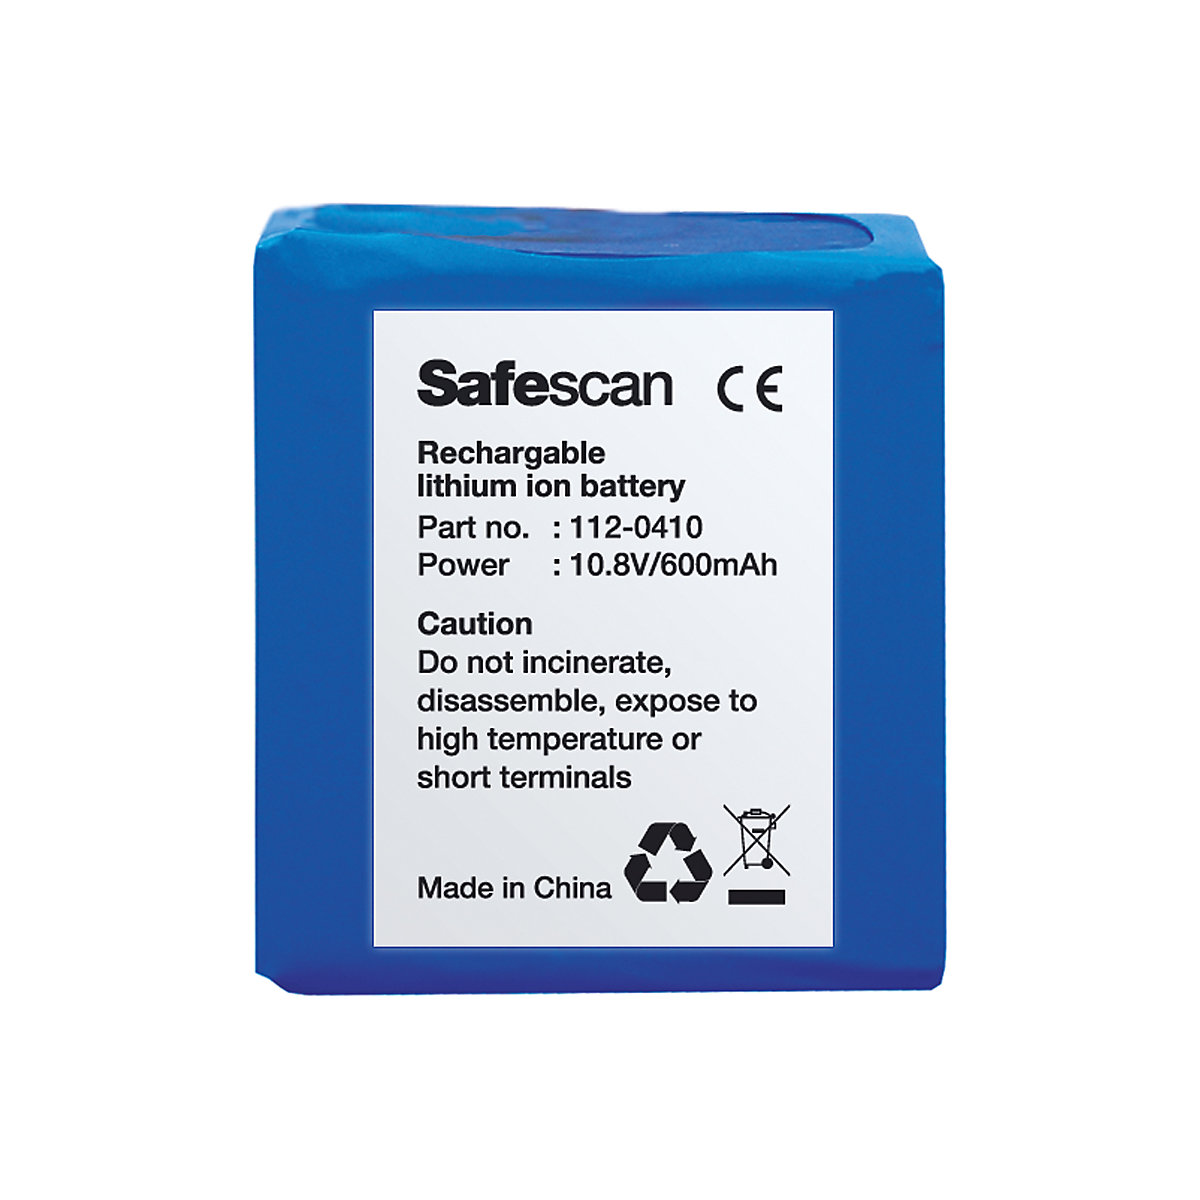 Rechargeable battery – Safescan